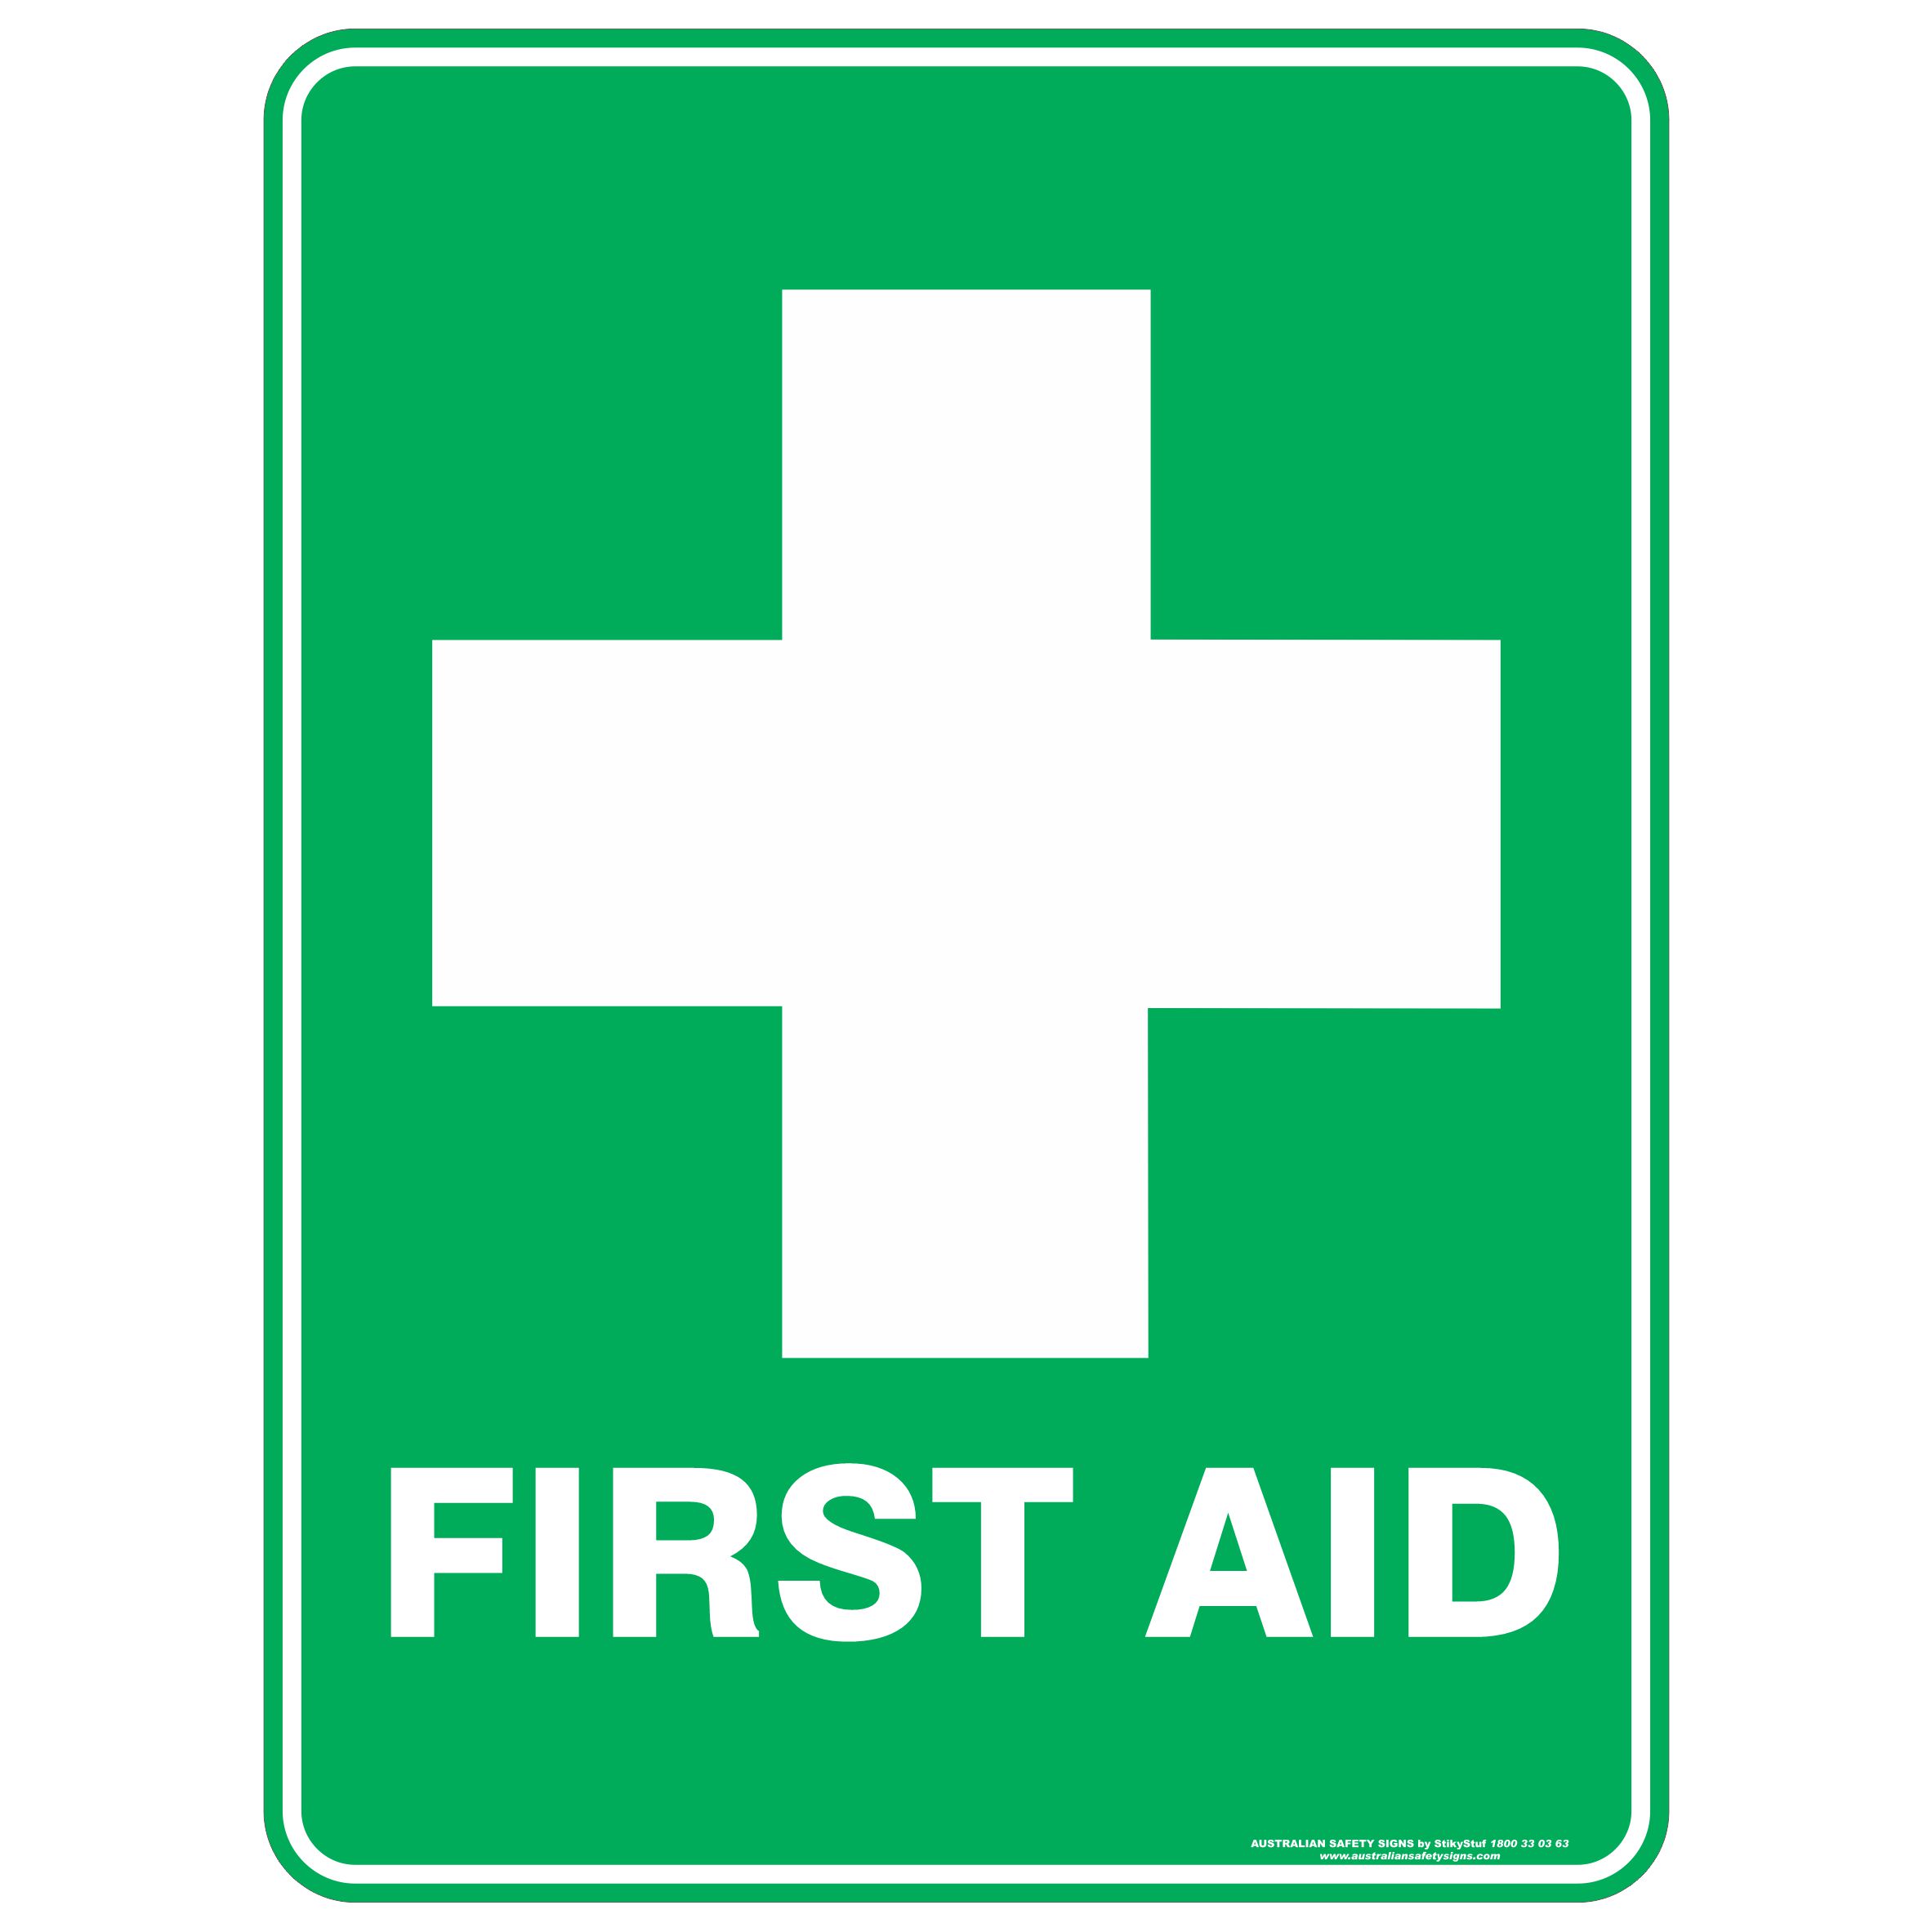 First Aid - Safety Sign